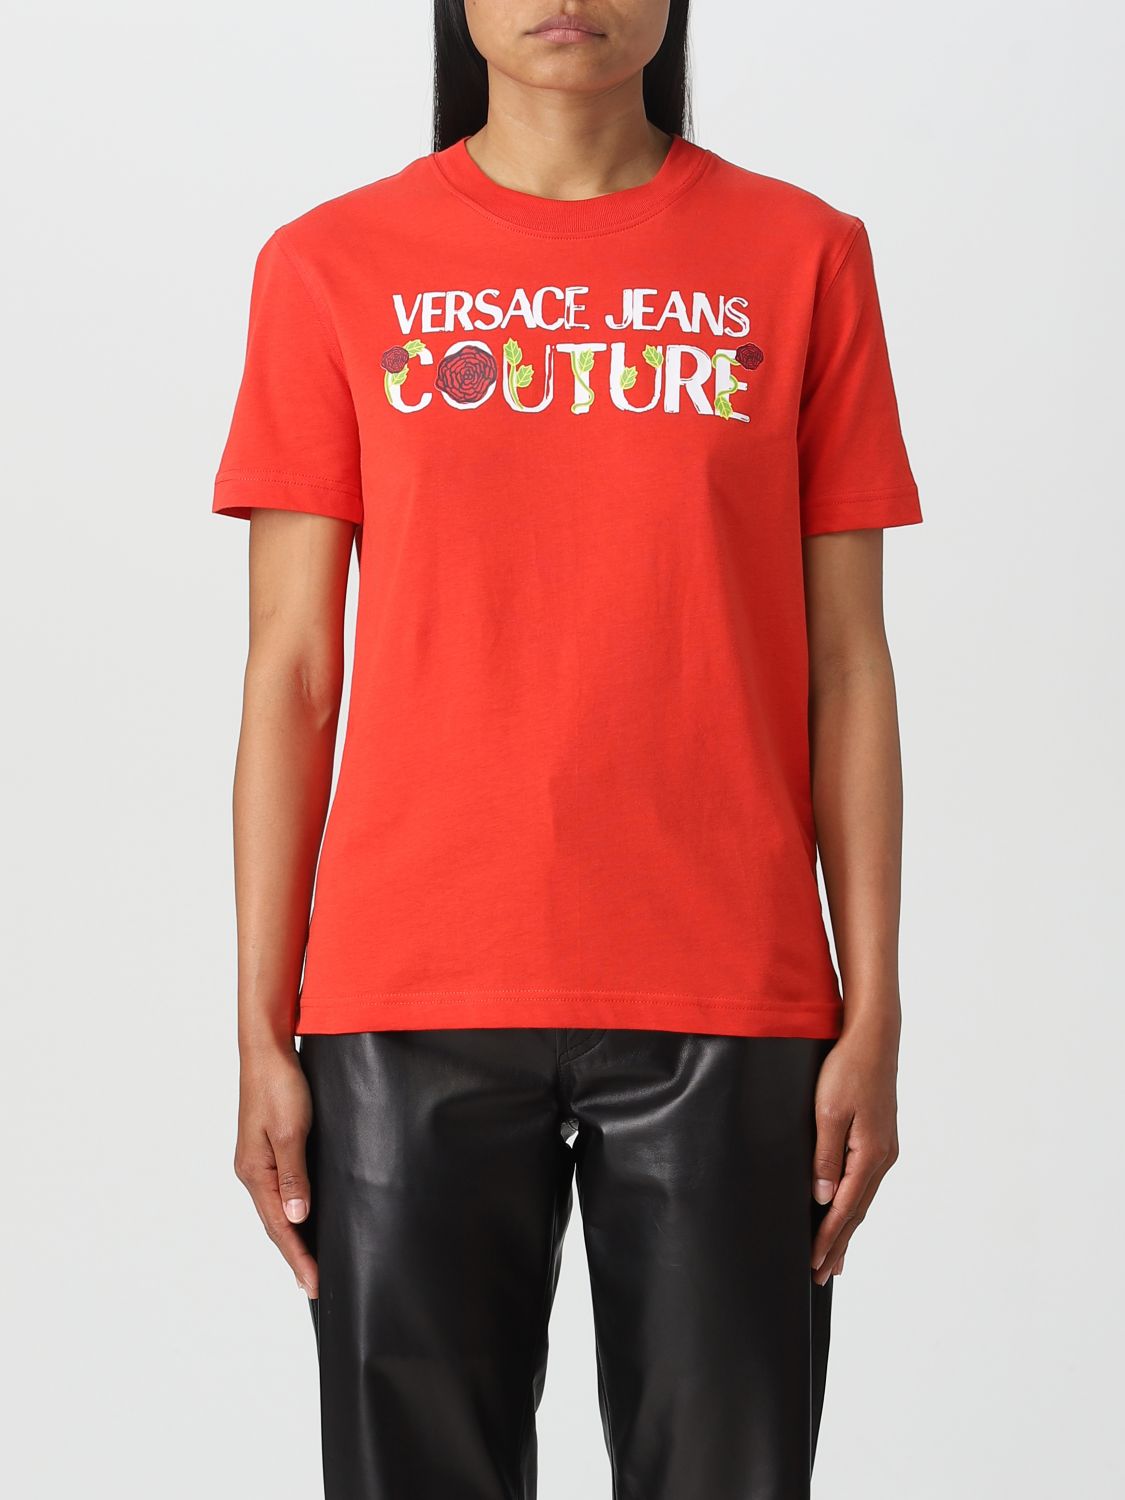 Versace Jeans Couture T-shirt  Damen Farbe Rot In Red